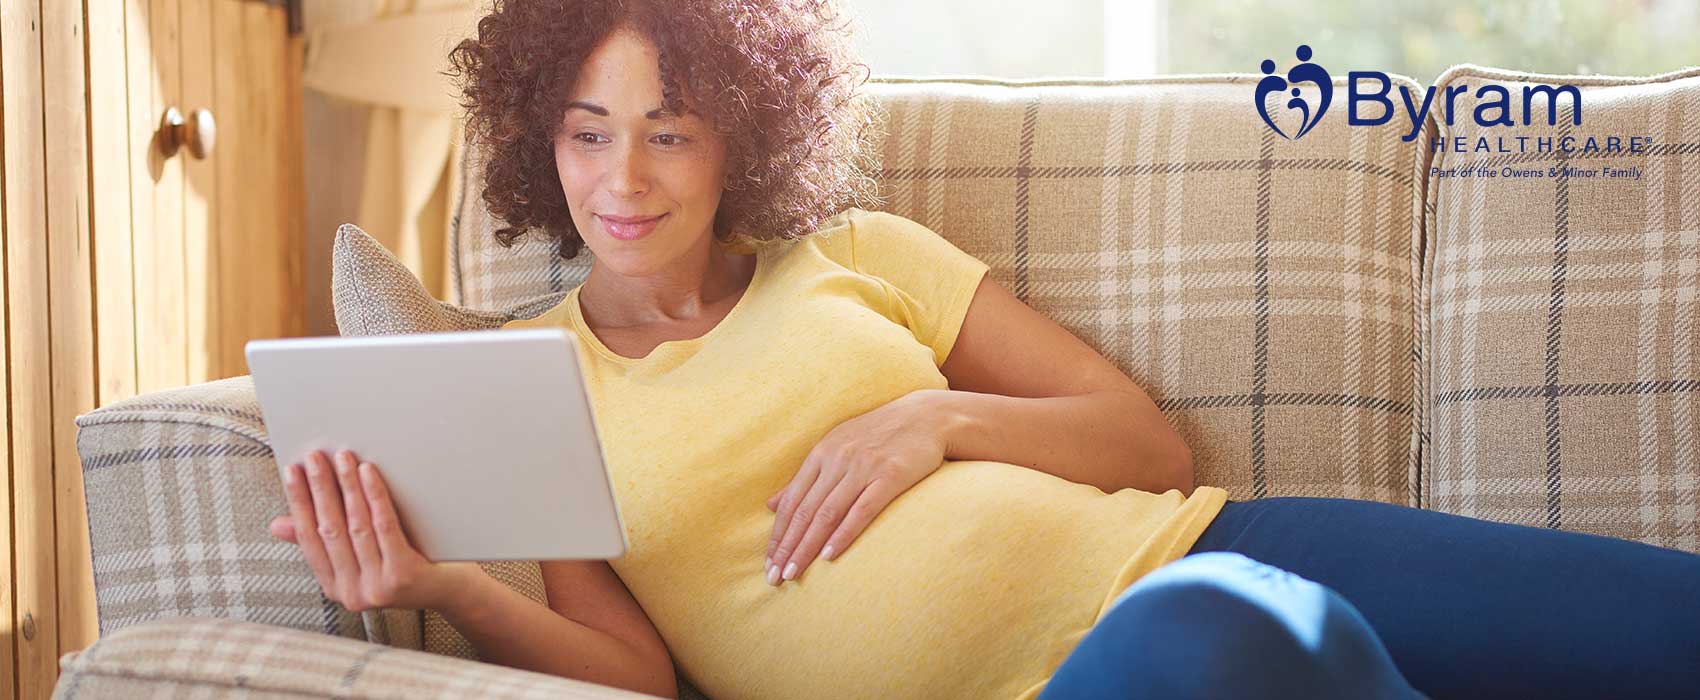 Pregnant woman looking at breast pumps online.